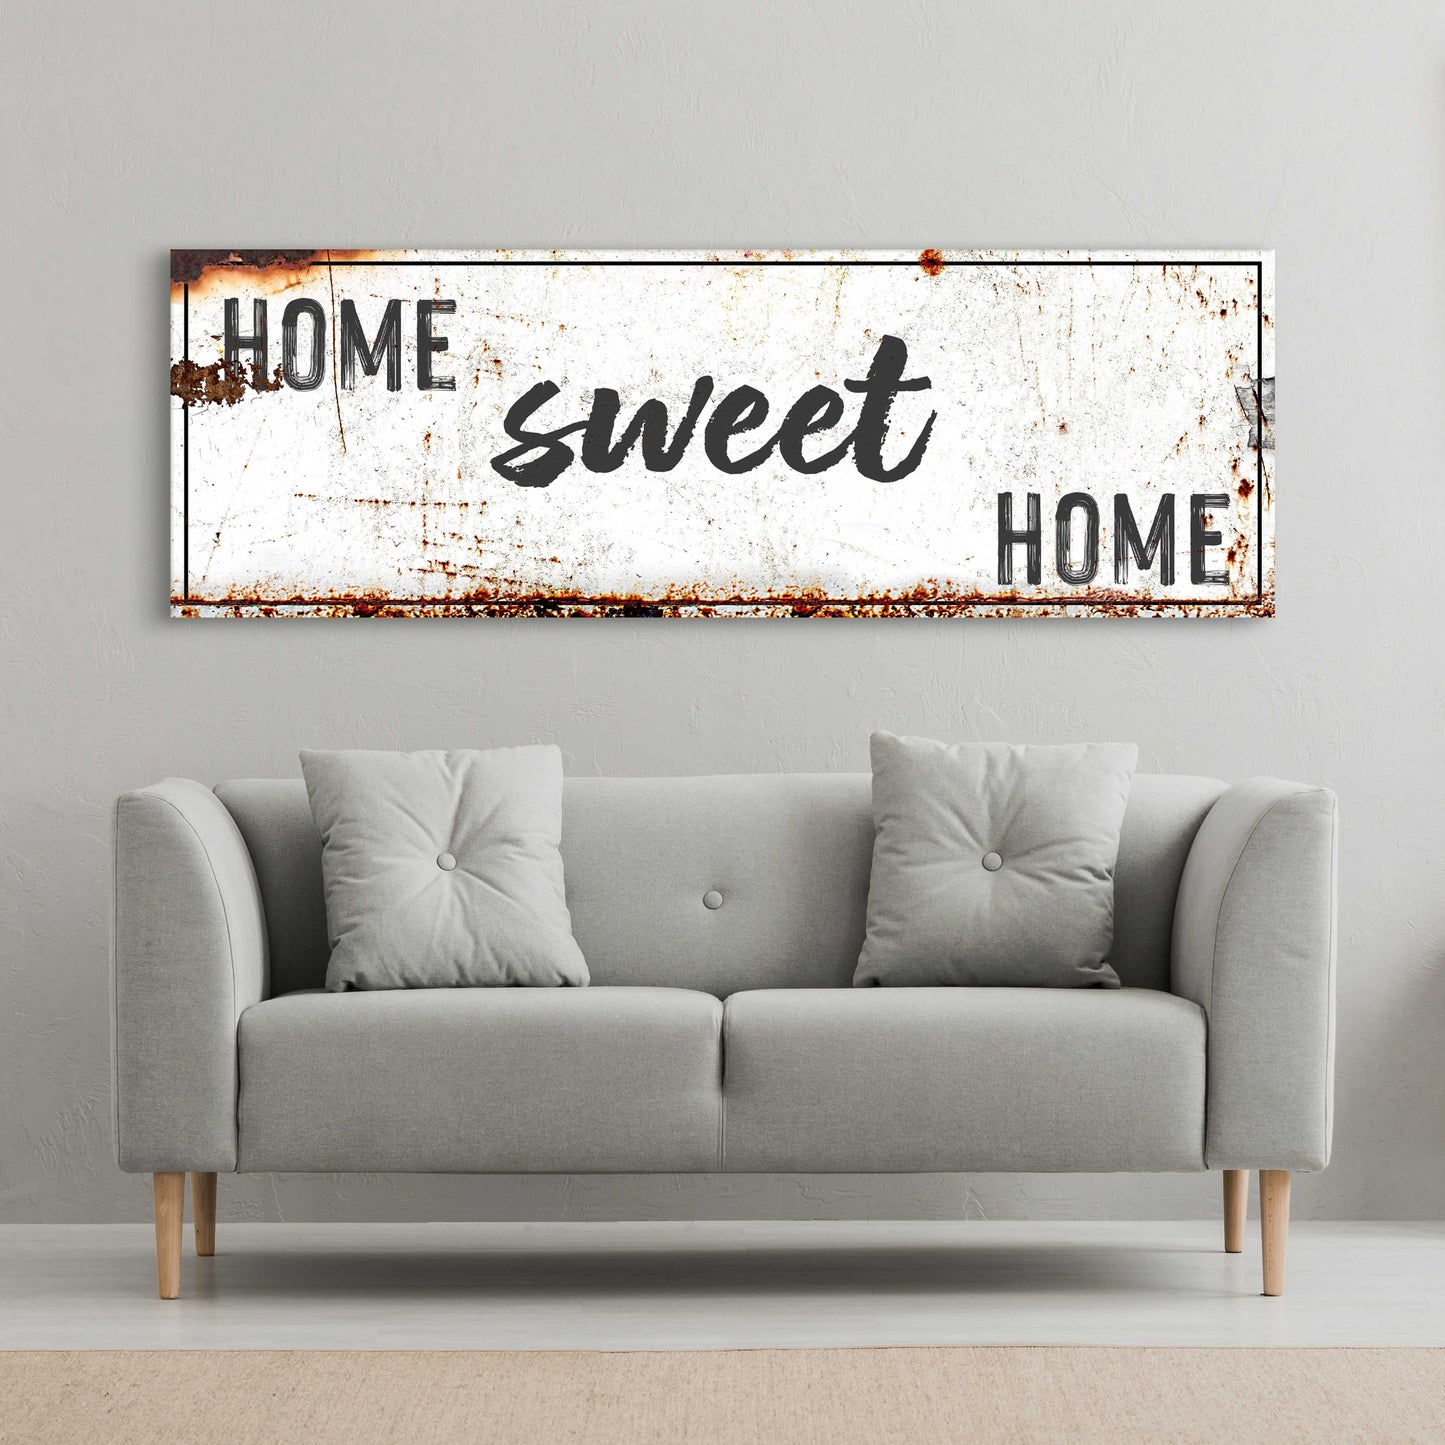 Home Sweet Home Rustic Sign - Image by Tailored Canvases